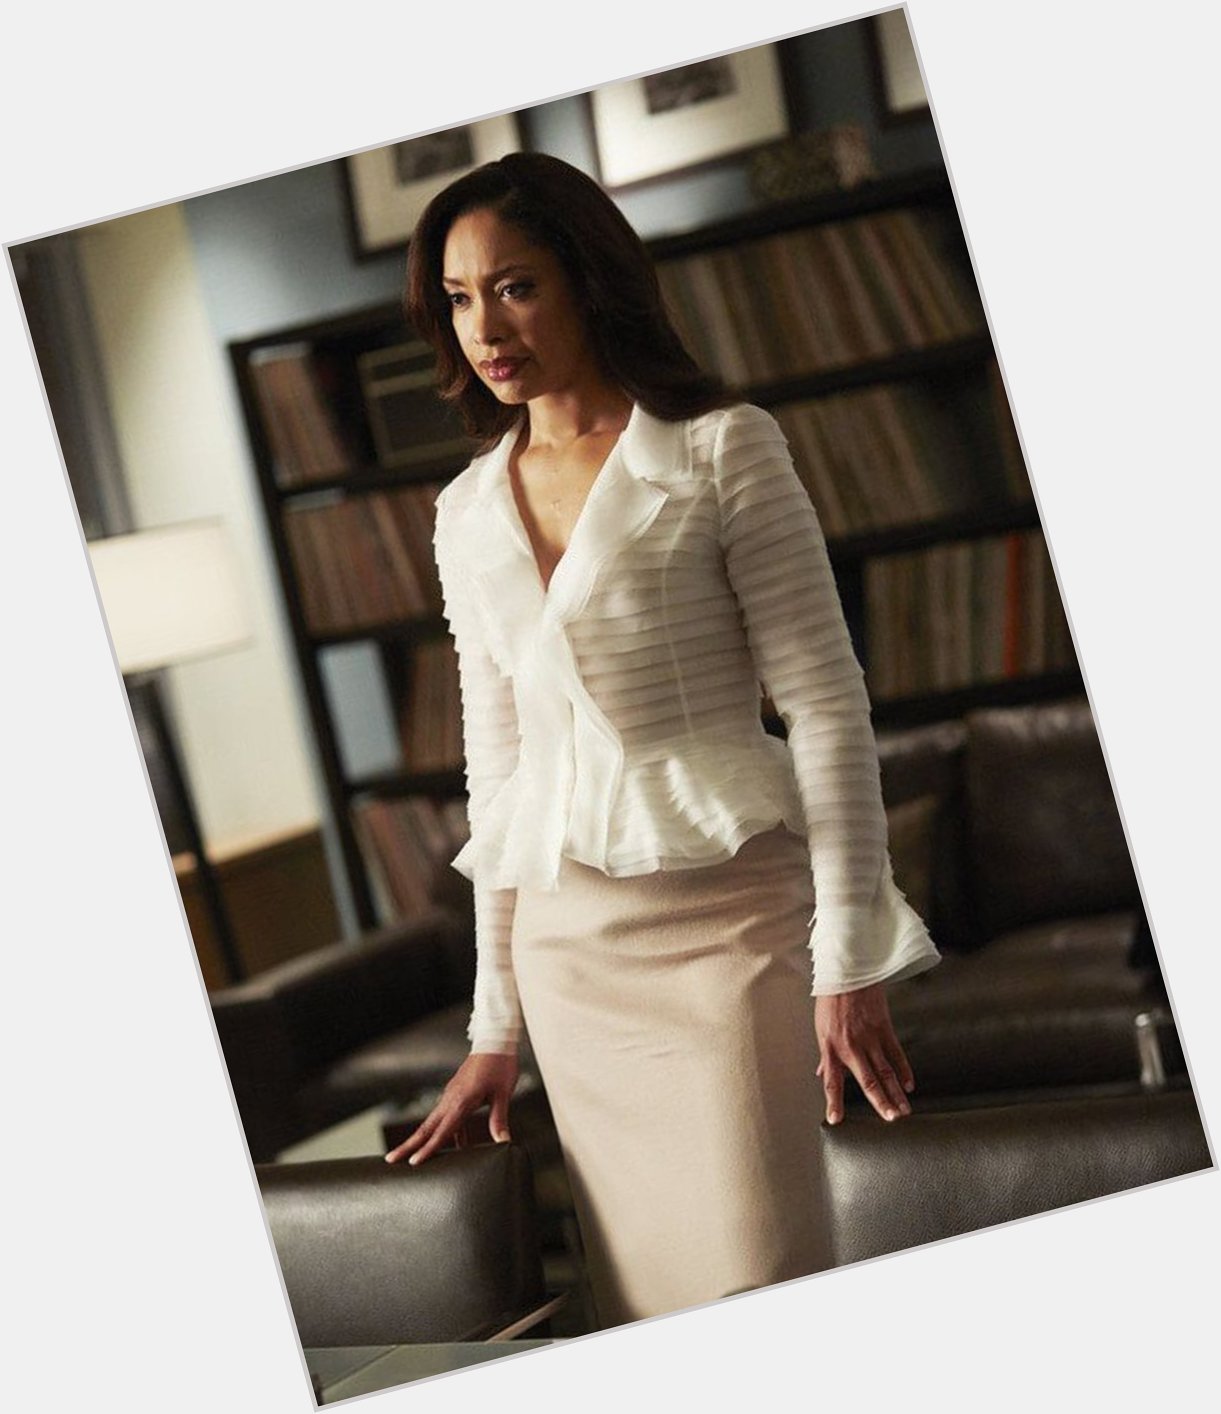 Happy birthday Gina Torres! Always looking fabulous in her role as Jessica Pearson on  